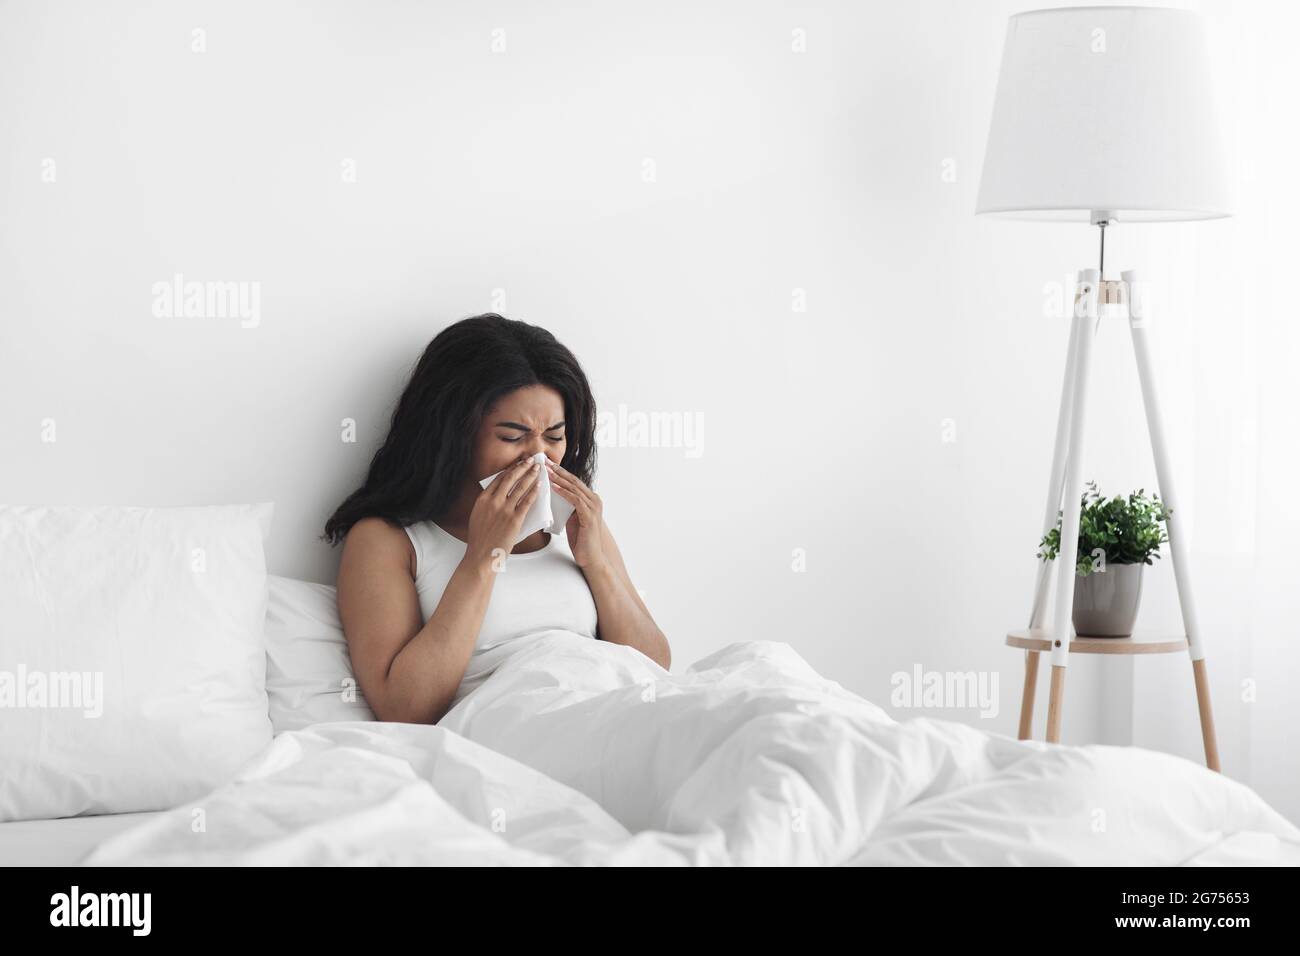 Sick day at home. Ill african american woman has runny nose, cough and cold, blowing nose, sitting in bed, copy space Stock Photo